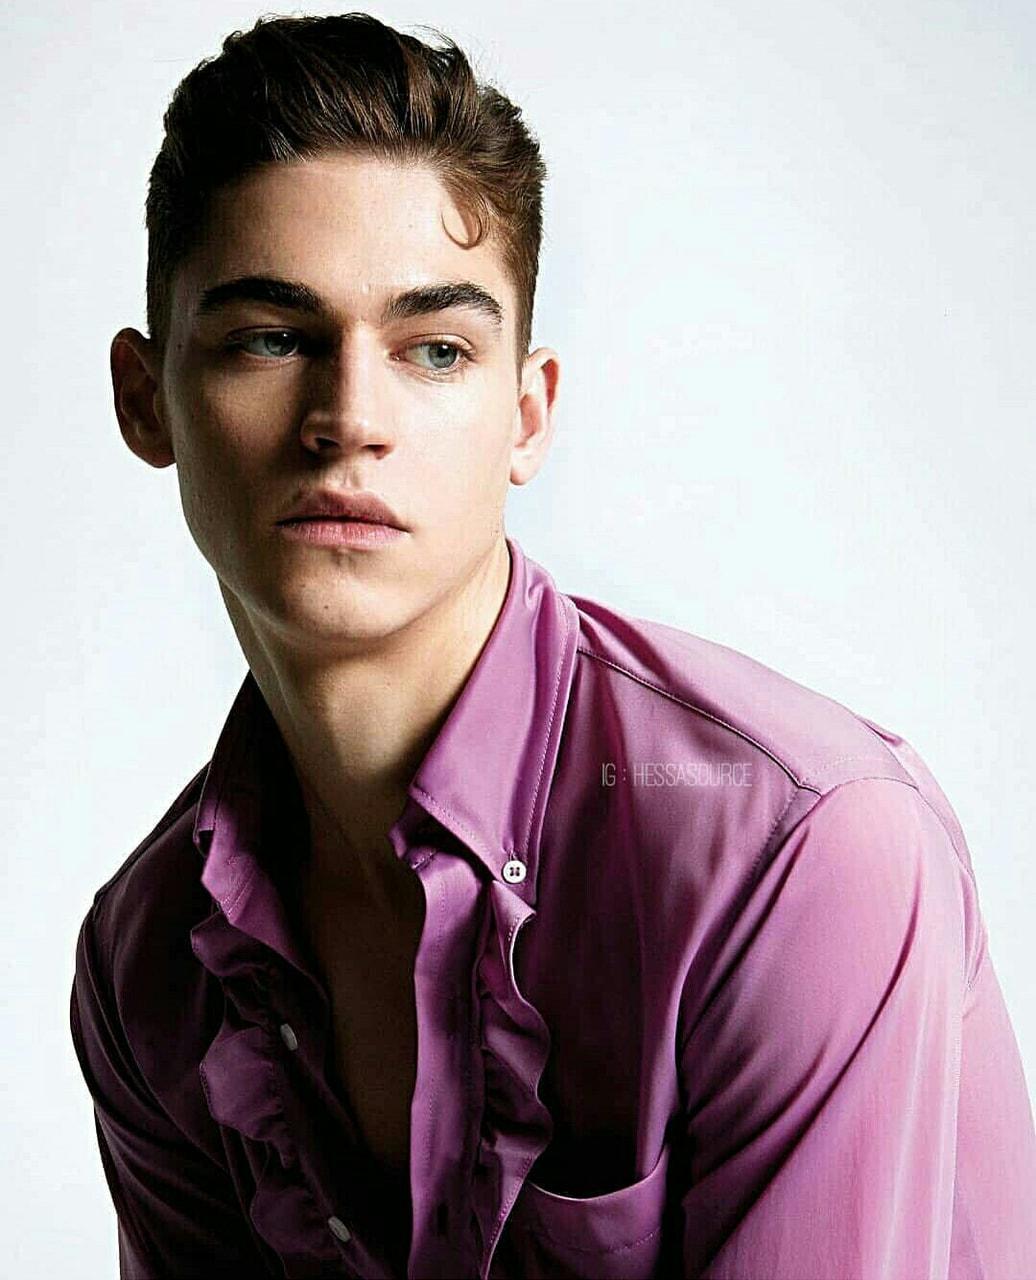 image about Hero Fiennes Tiffin